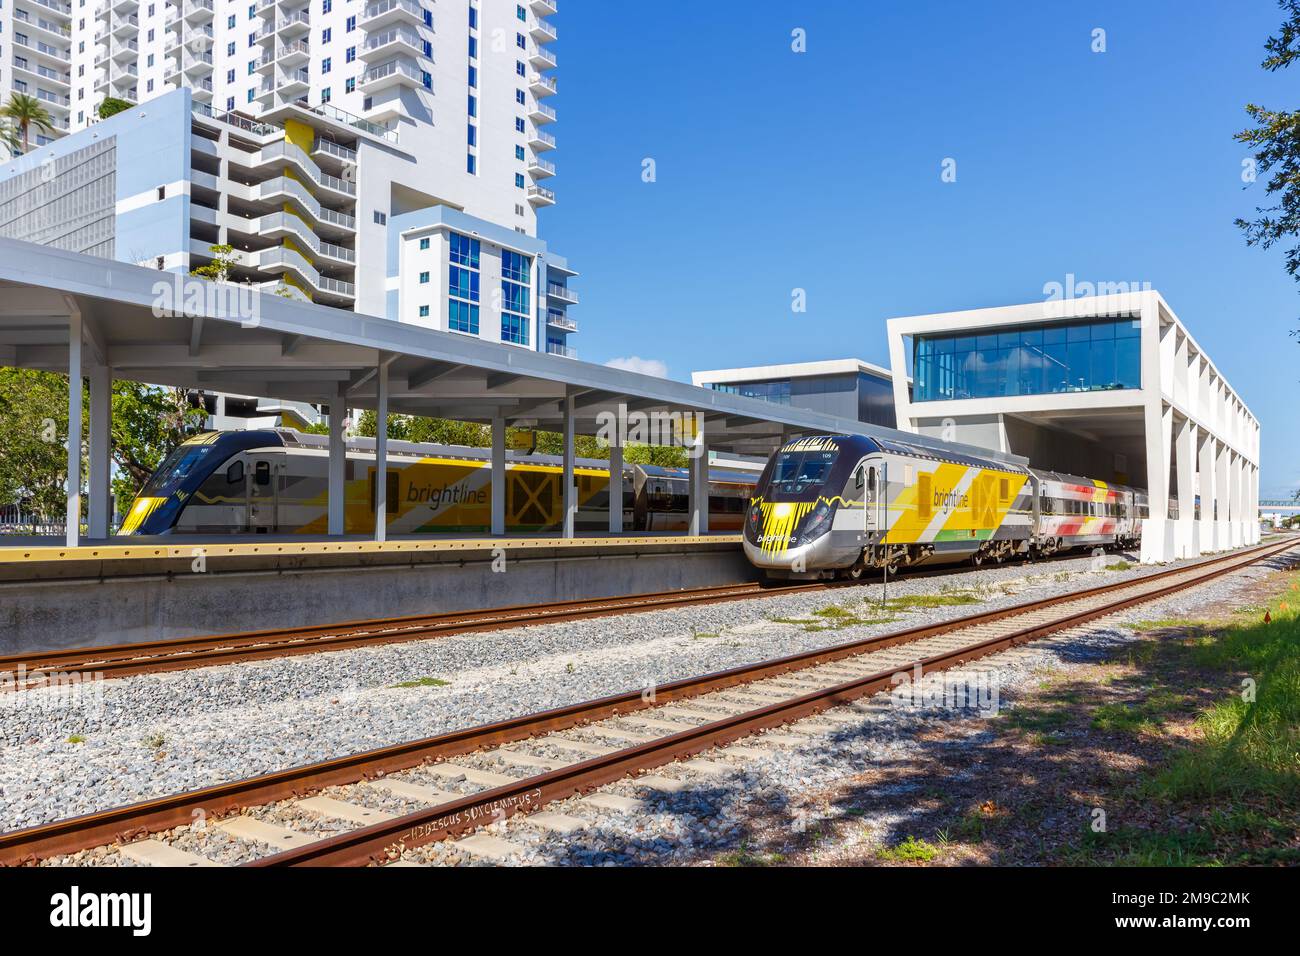 West Palm Beach, United States - November 14, 2022: Brightline private inter-city rail train at West Palm Beach railway station in Florida, United Sta Stock Photo